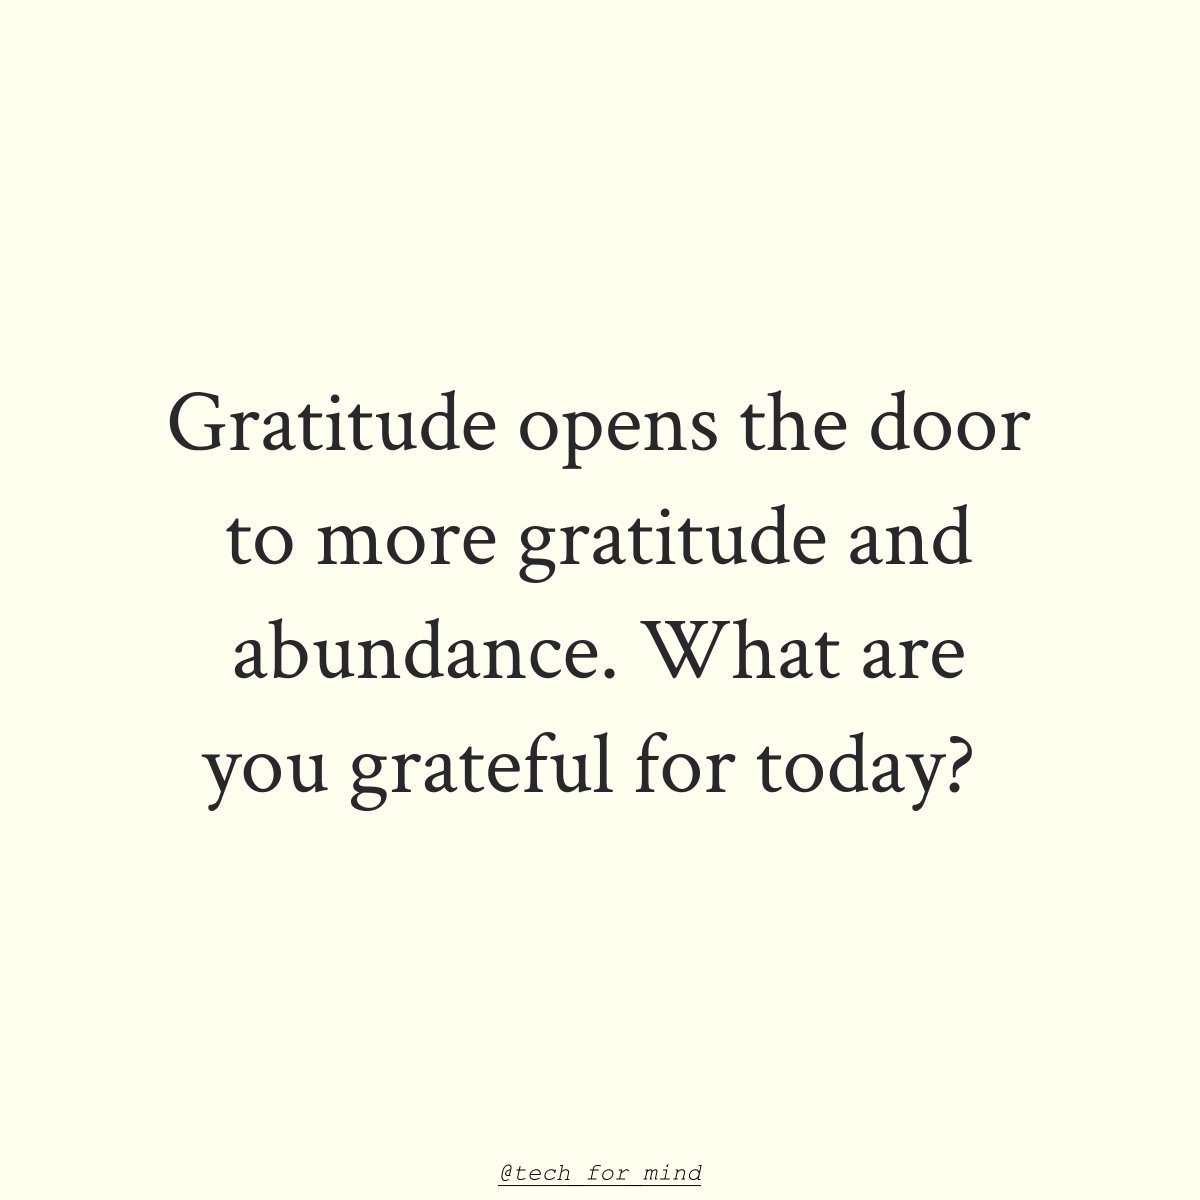 What fills your heart with gratitude? Let's share our blessings! 🙌
#GratitudeAttitude #ThankfulHearts #AbundanceMindset